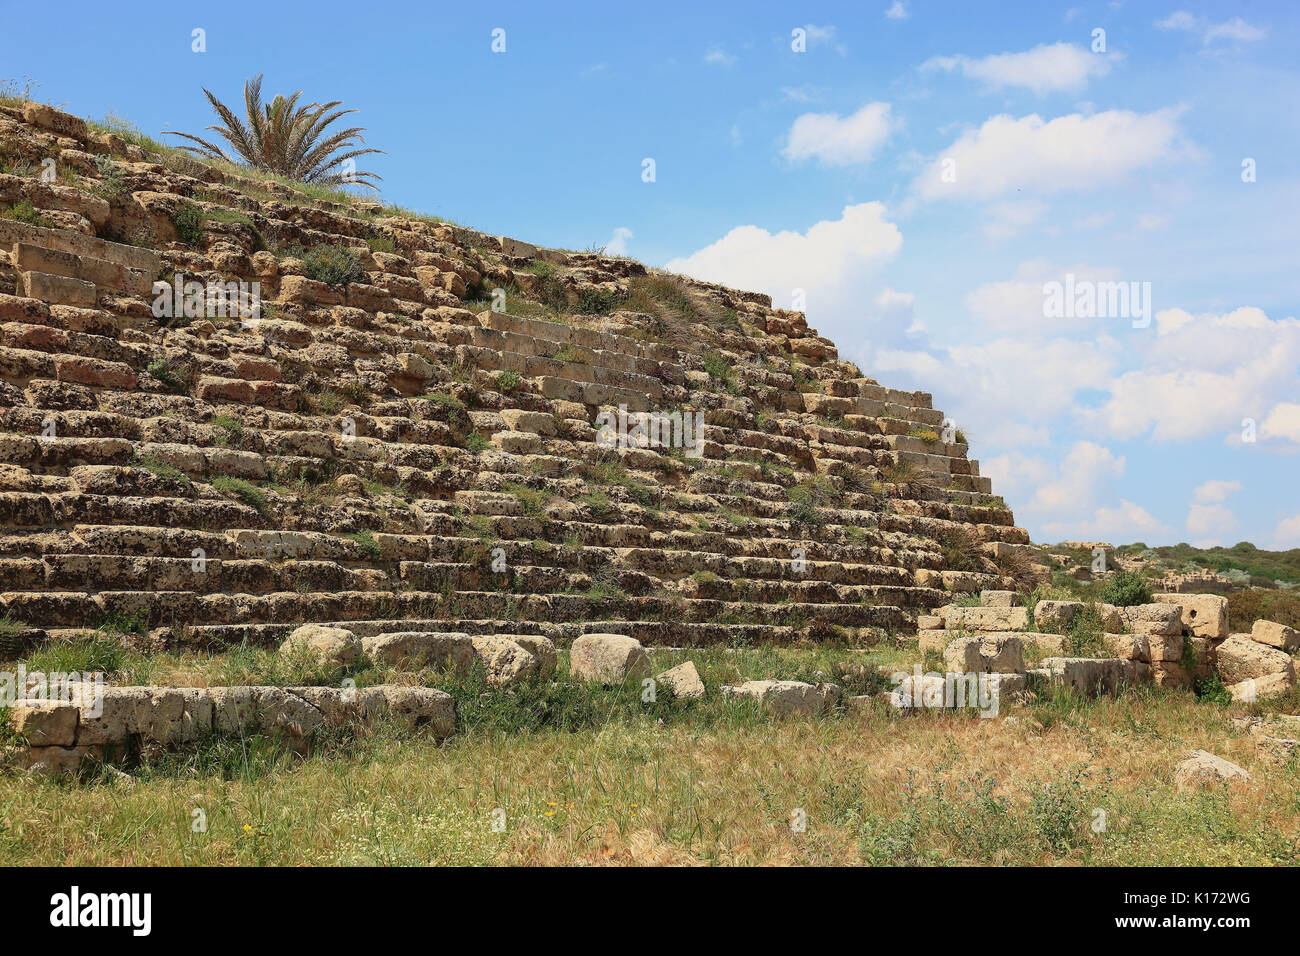 Sicily, Selinunte, in the archaeological excavation site in the province of Trapani, remnants of a city wall Stock Photo